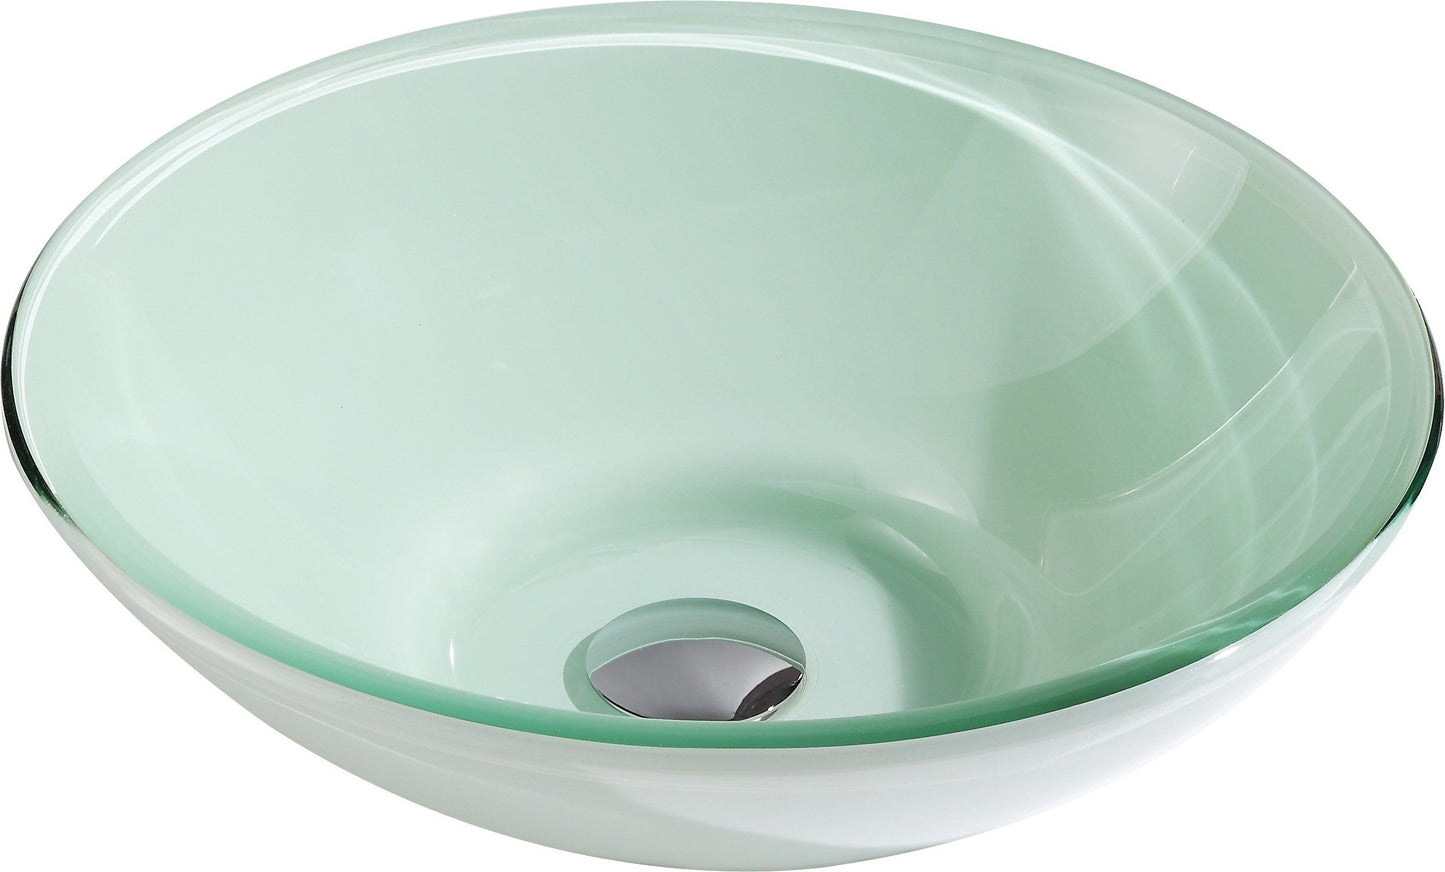 Sonata Series Deco-Glass Vessel Sink in Lustrous Light Green with Crown Faucet in Polished Chrome - Luxe Bathroom Vanities